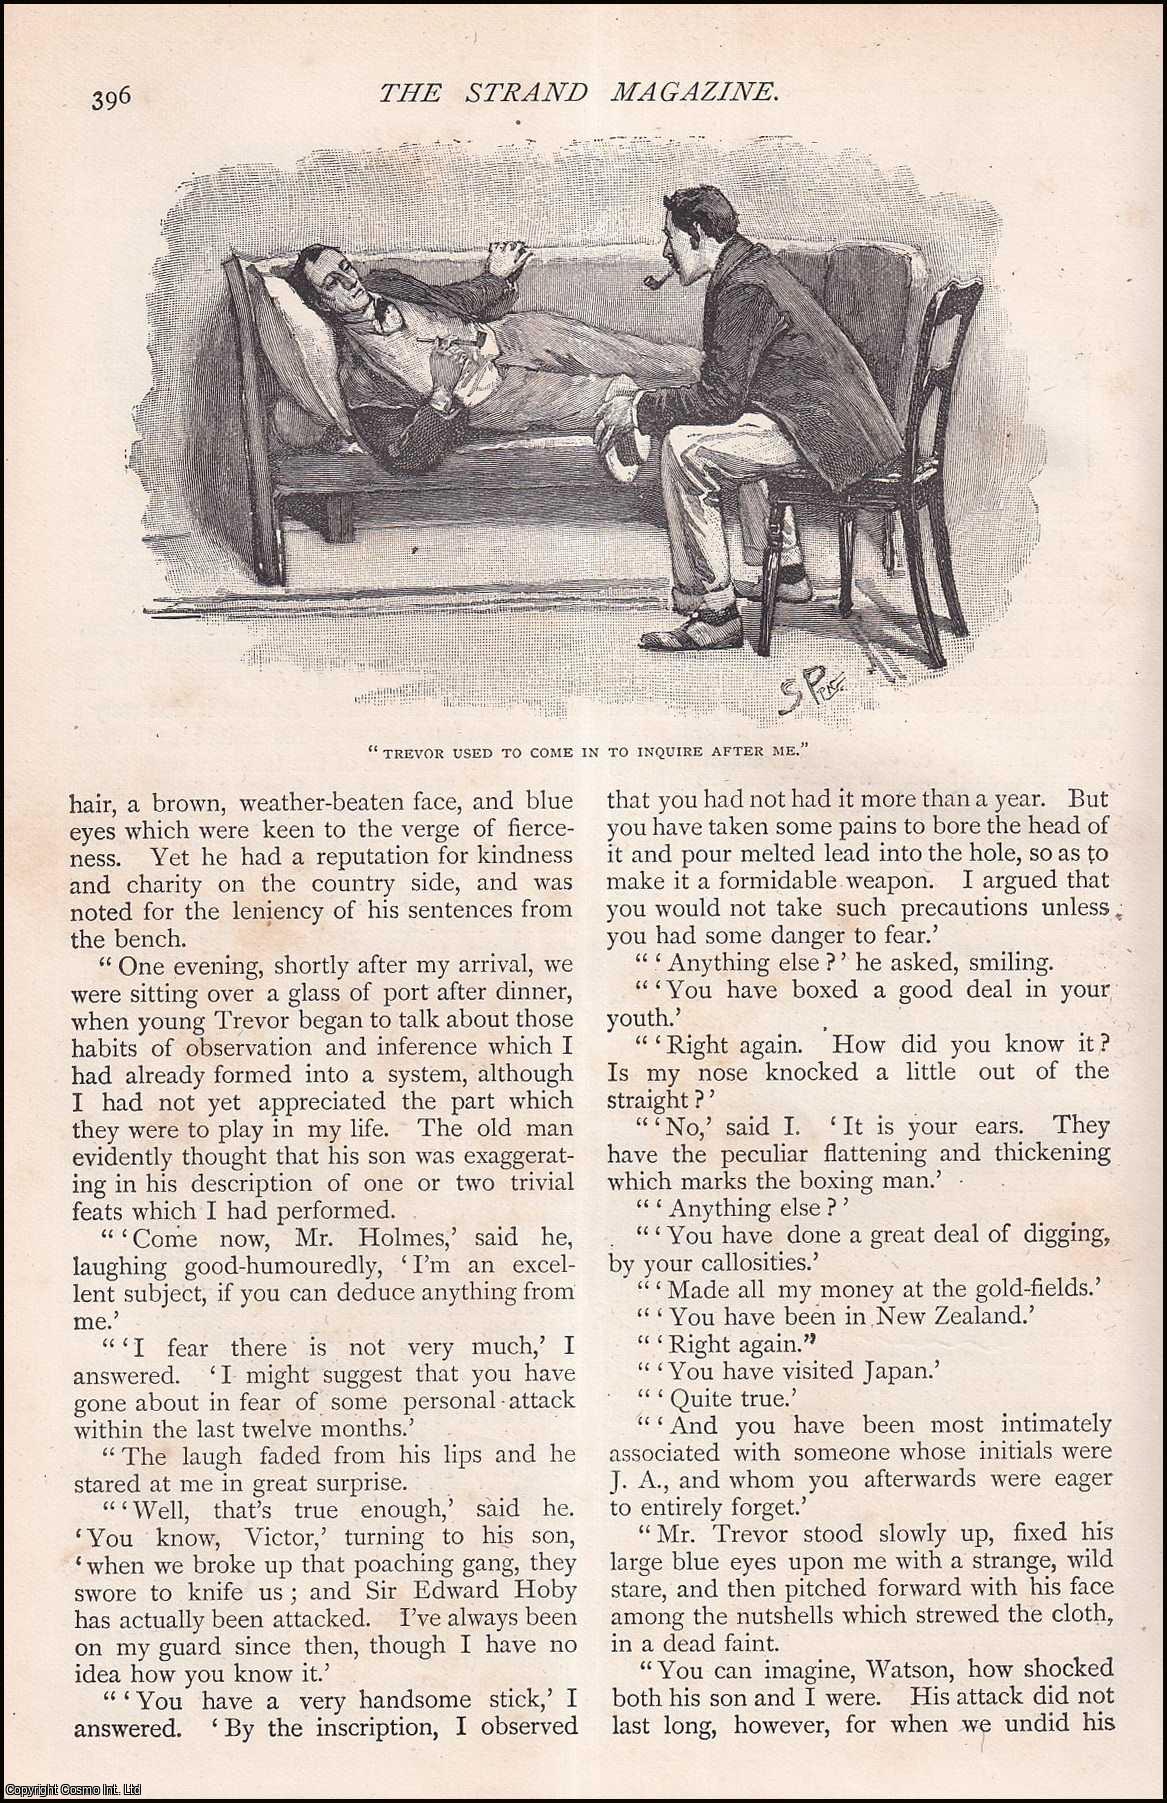 Arthur Conan Doyle - The Adventure of the Gloria Scott, by A. Conan Doyle : the Adventures of Sherlock Holmes. An uncommon original article from The Strand Magazine, 1892.